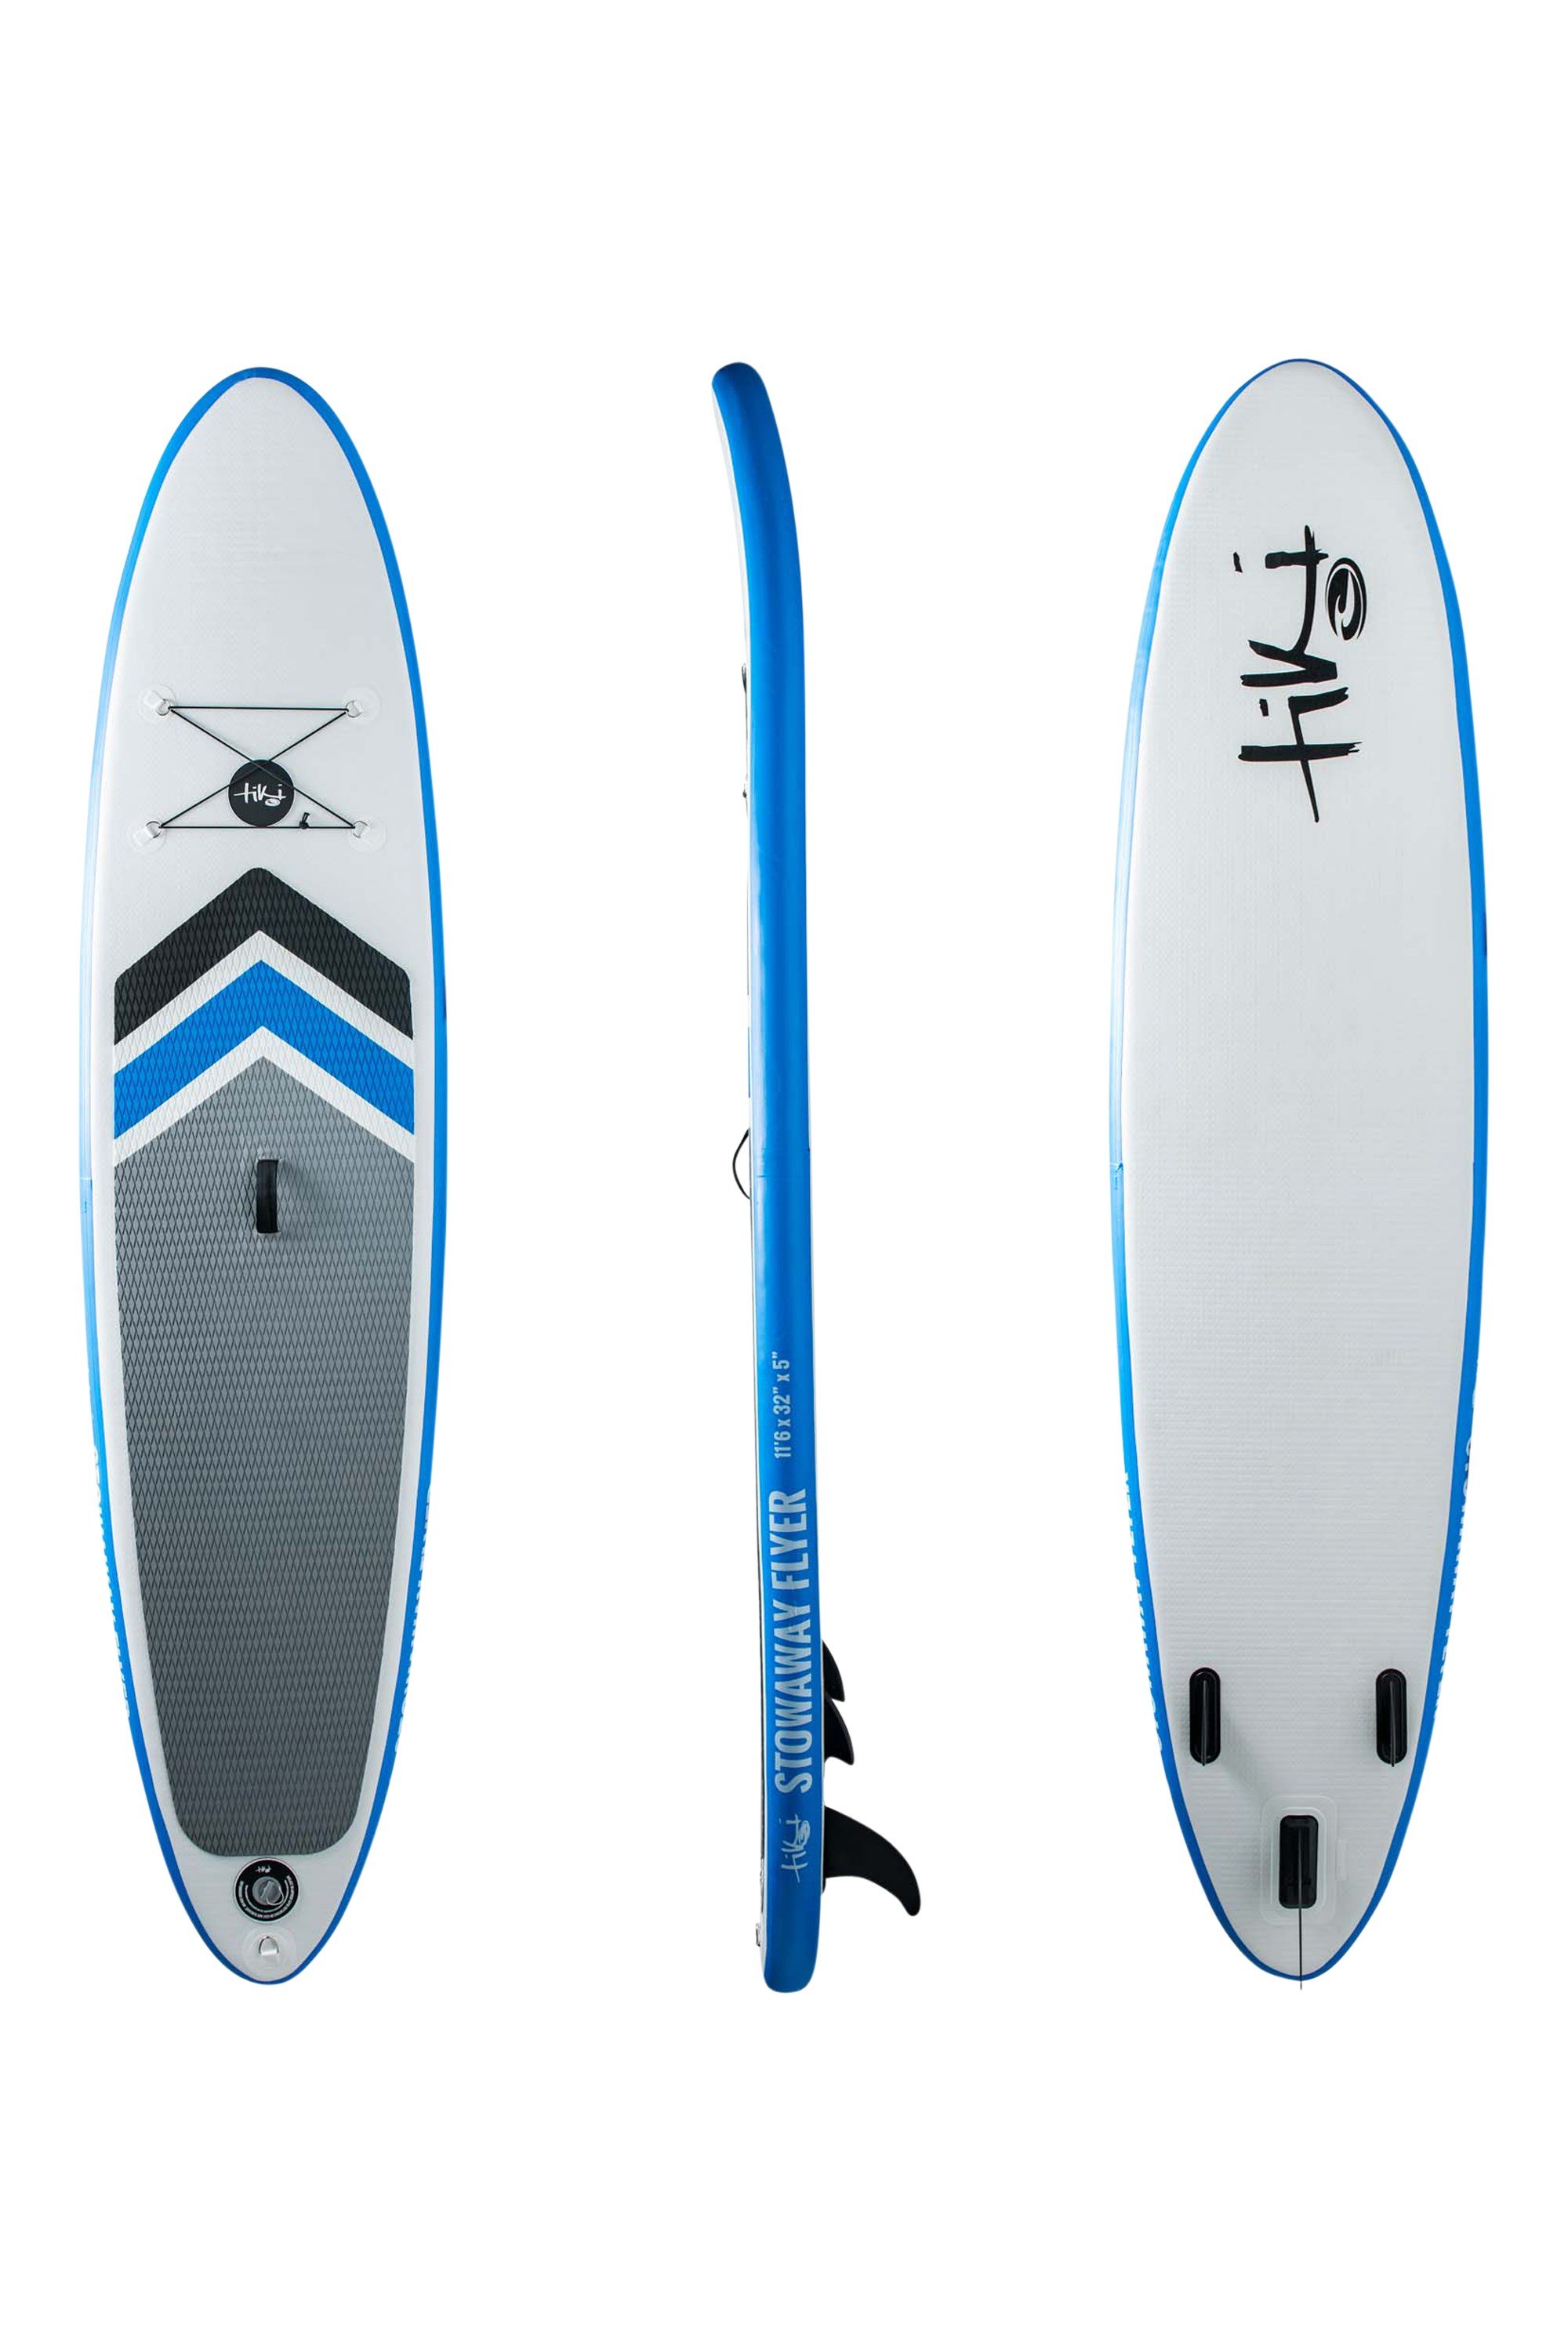 10’10 Stowaway XL SUP with Accessories -